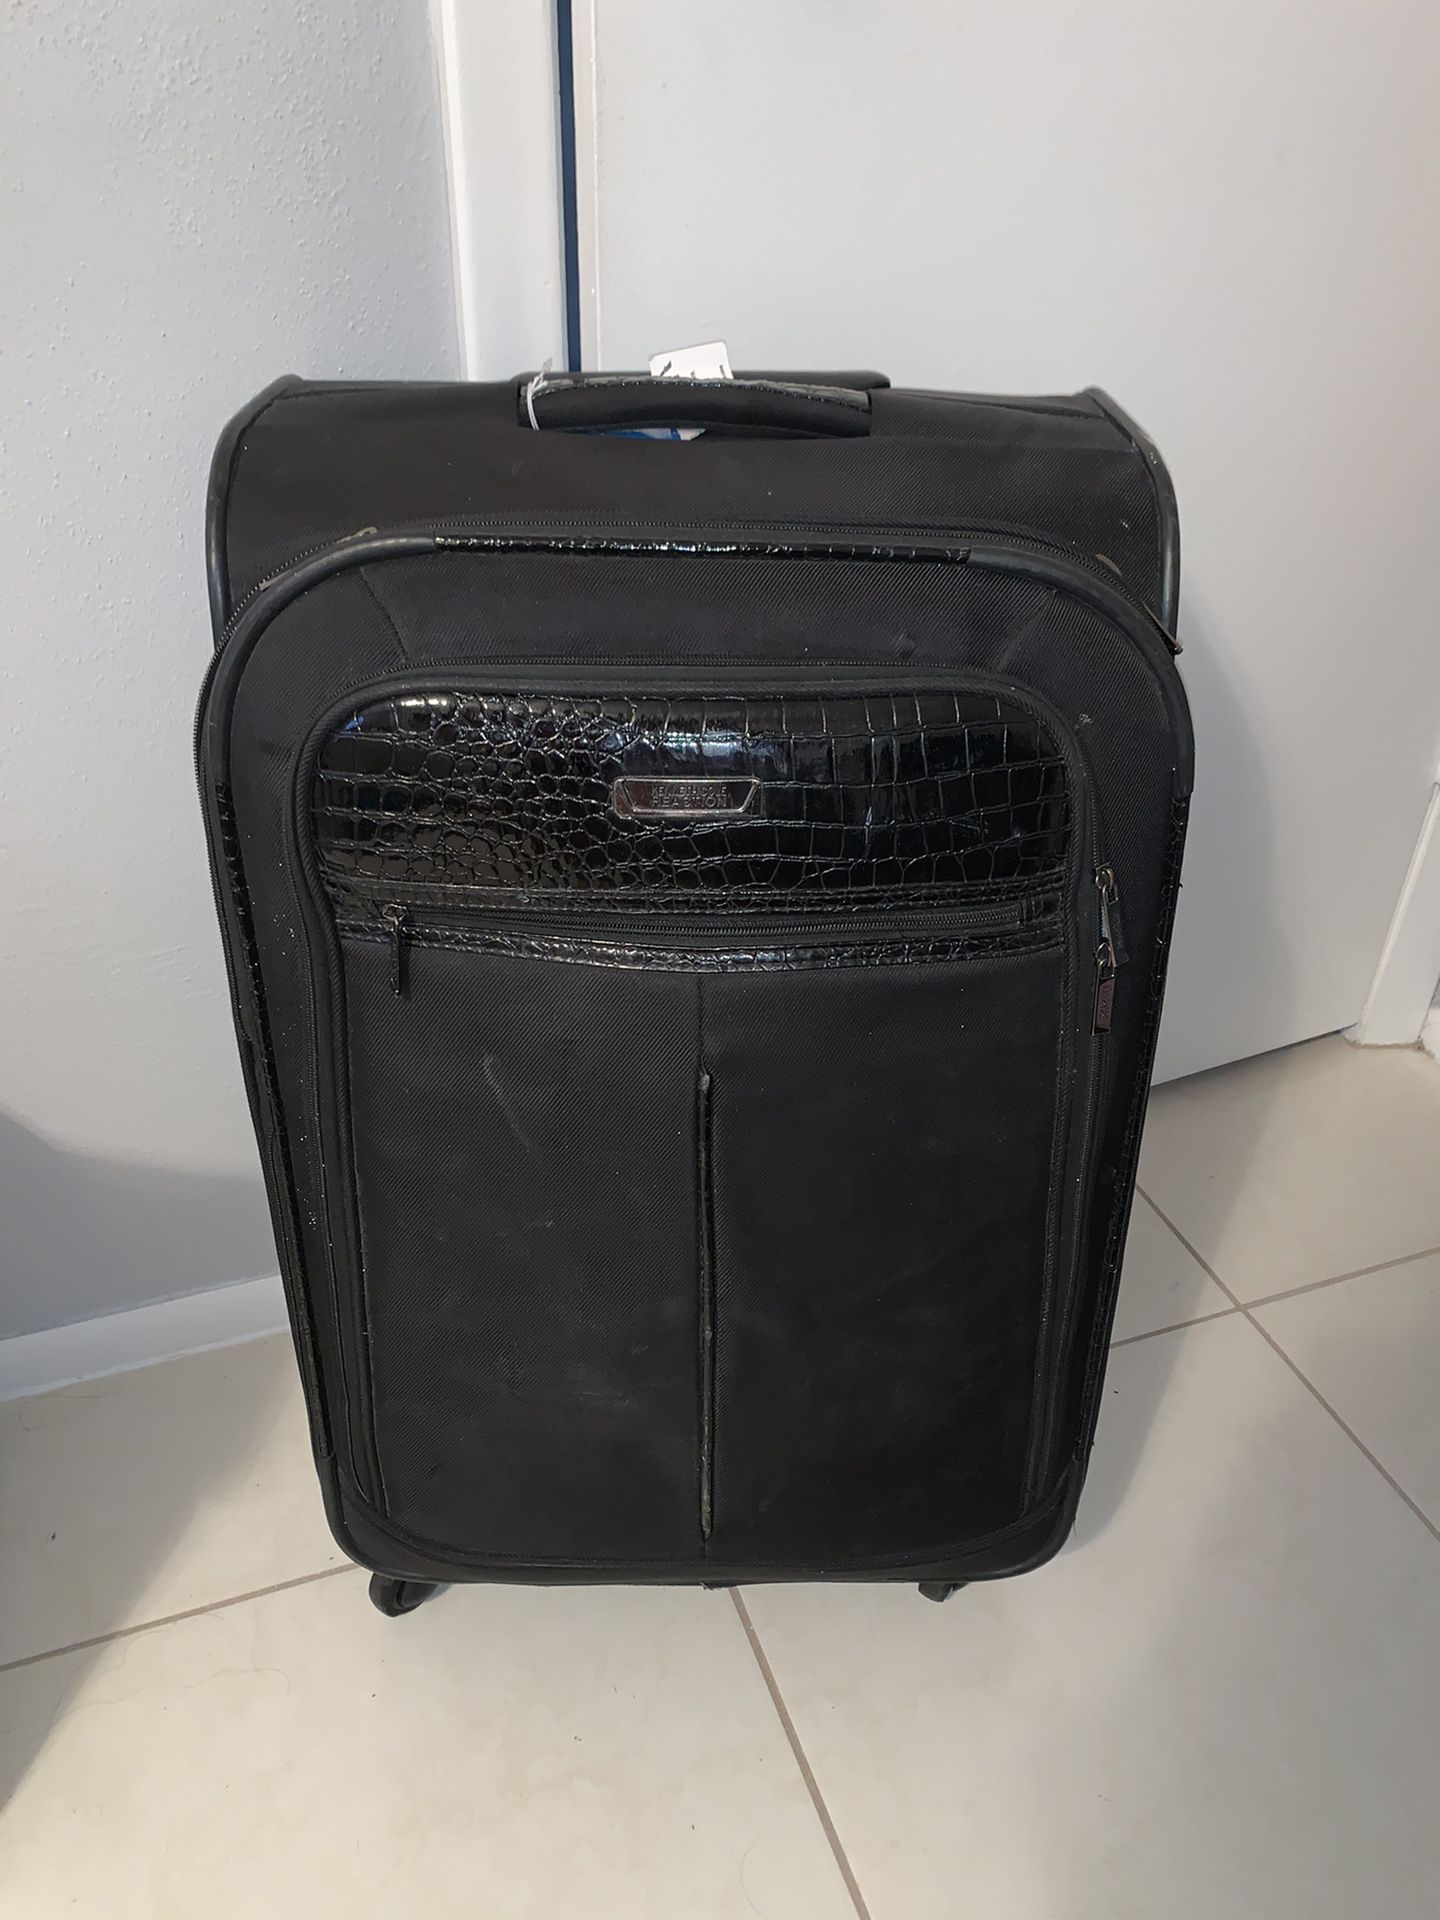 Kenneth Cole Reaction Luggage